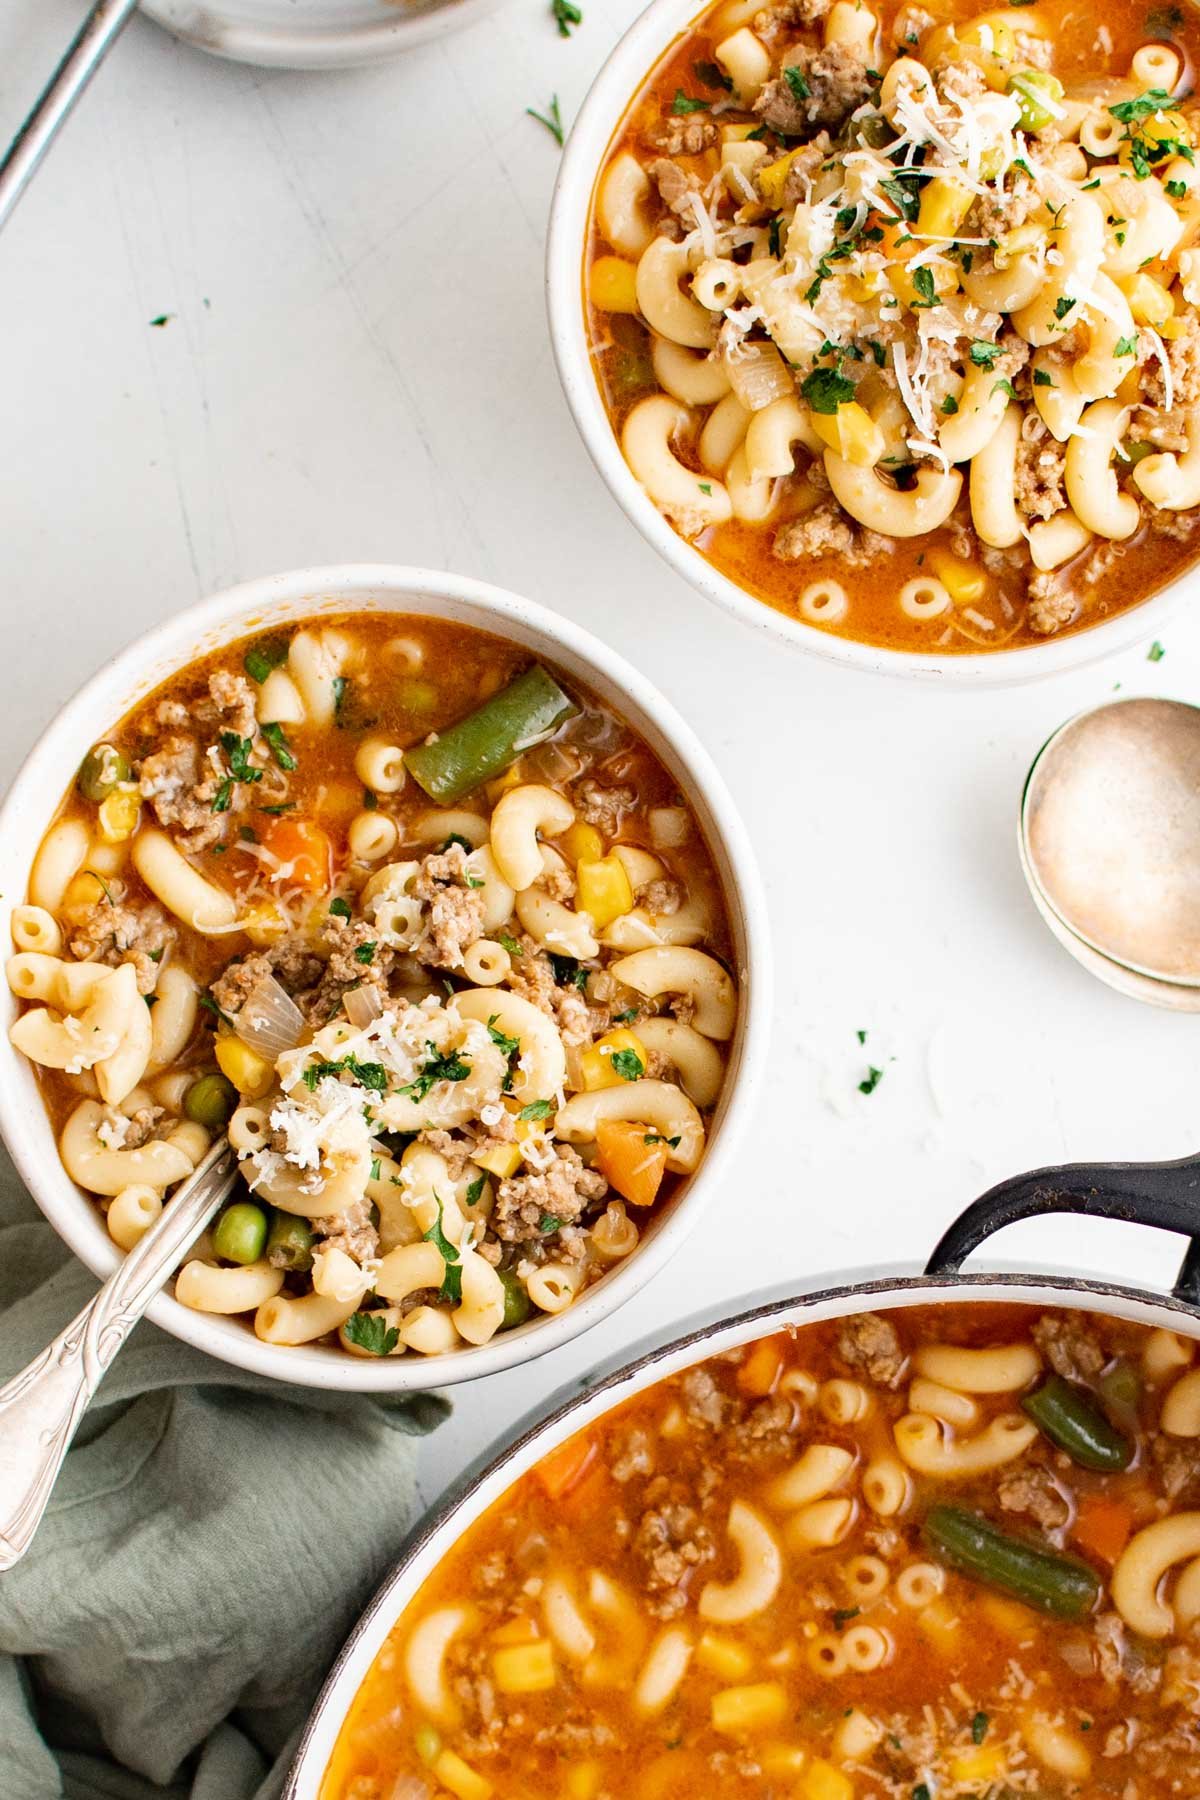 Bowls of hamburger soup with macaroni and vegetables.